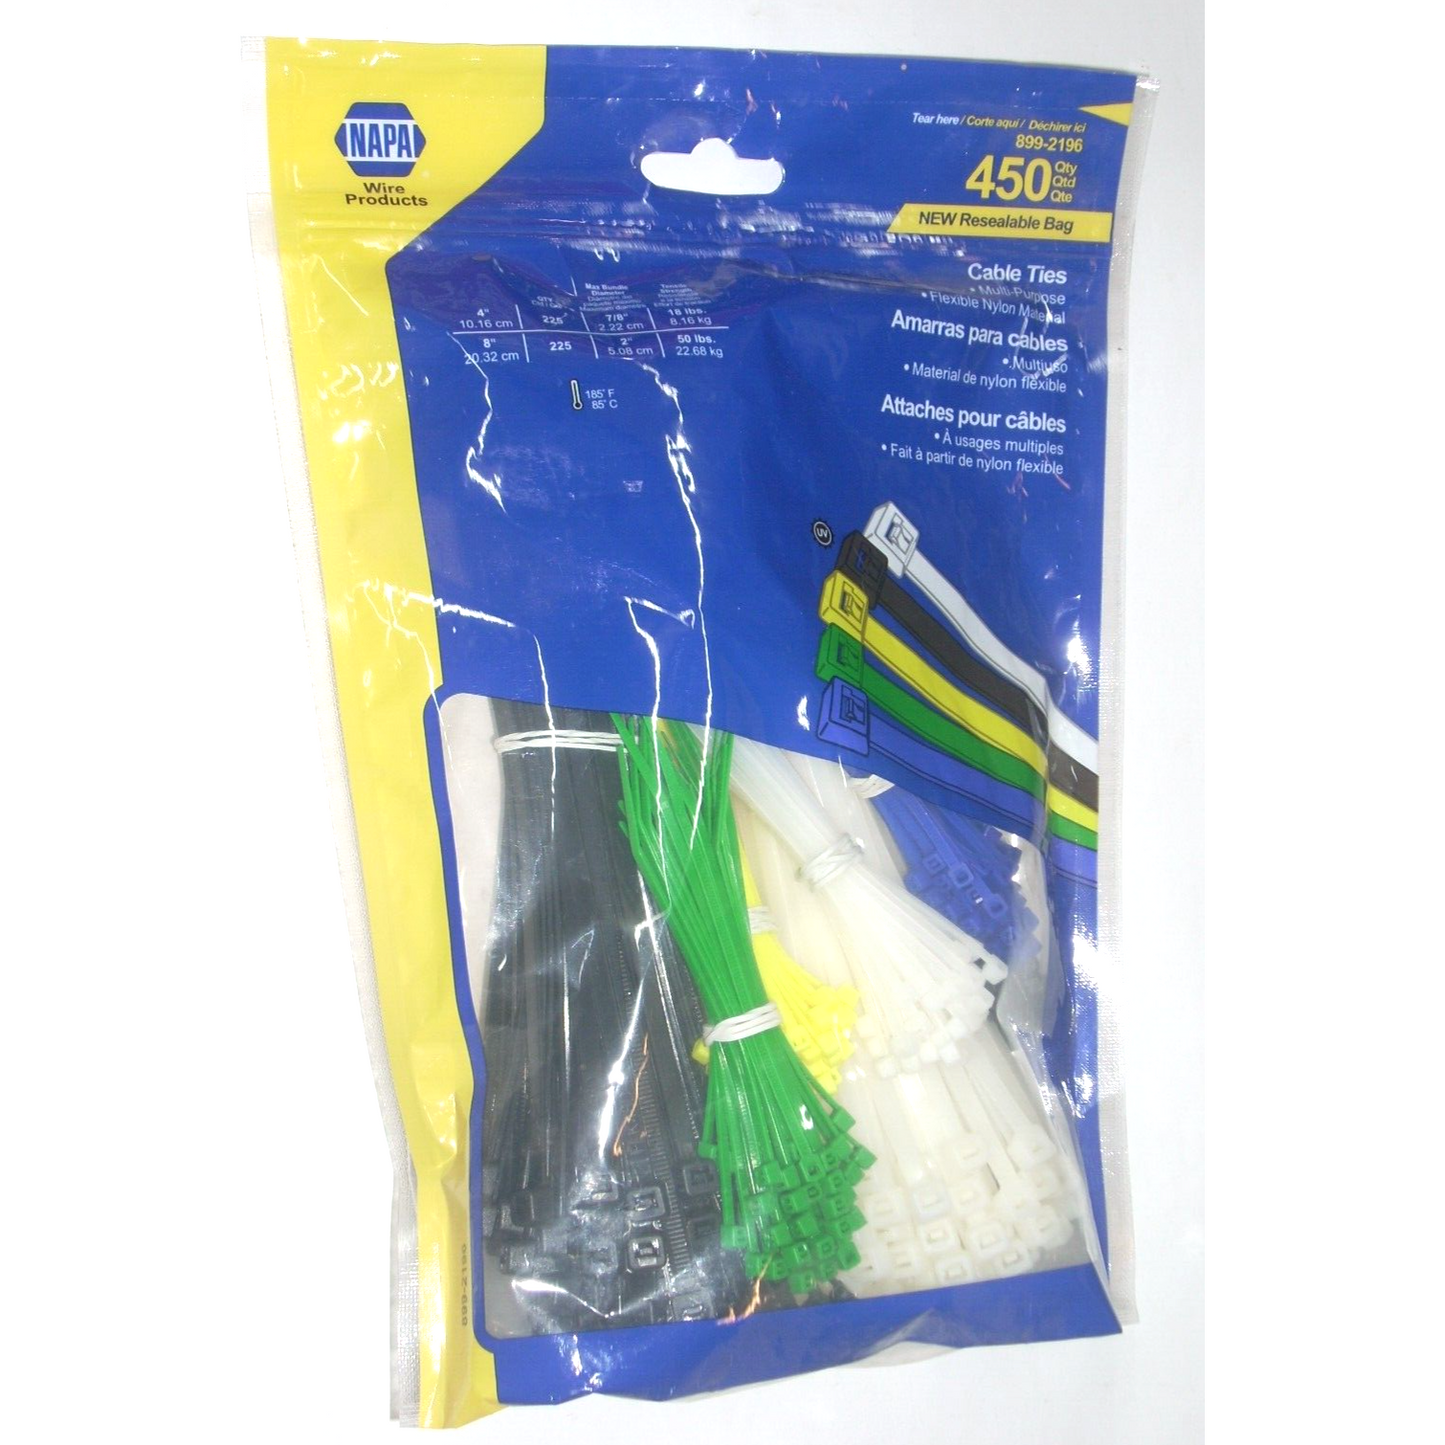 Napa 899-2196 Standard Cable Ties (225) 4" & (225) 8" Multiple Colors Incl 450pk